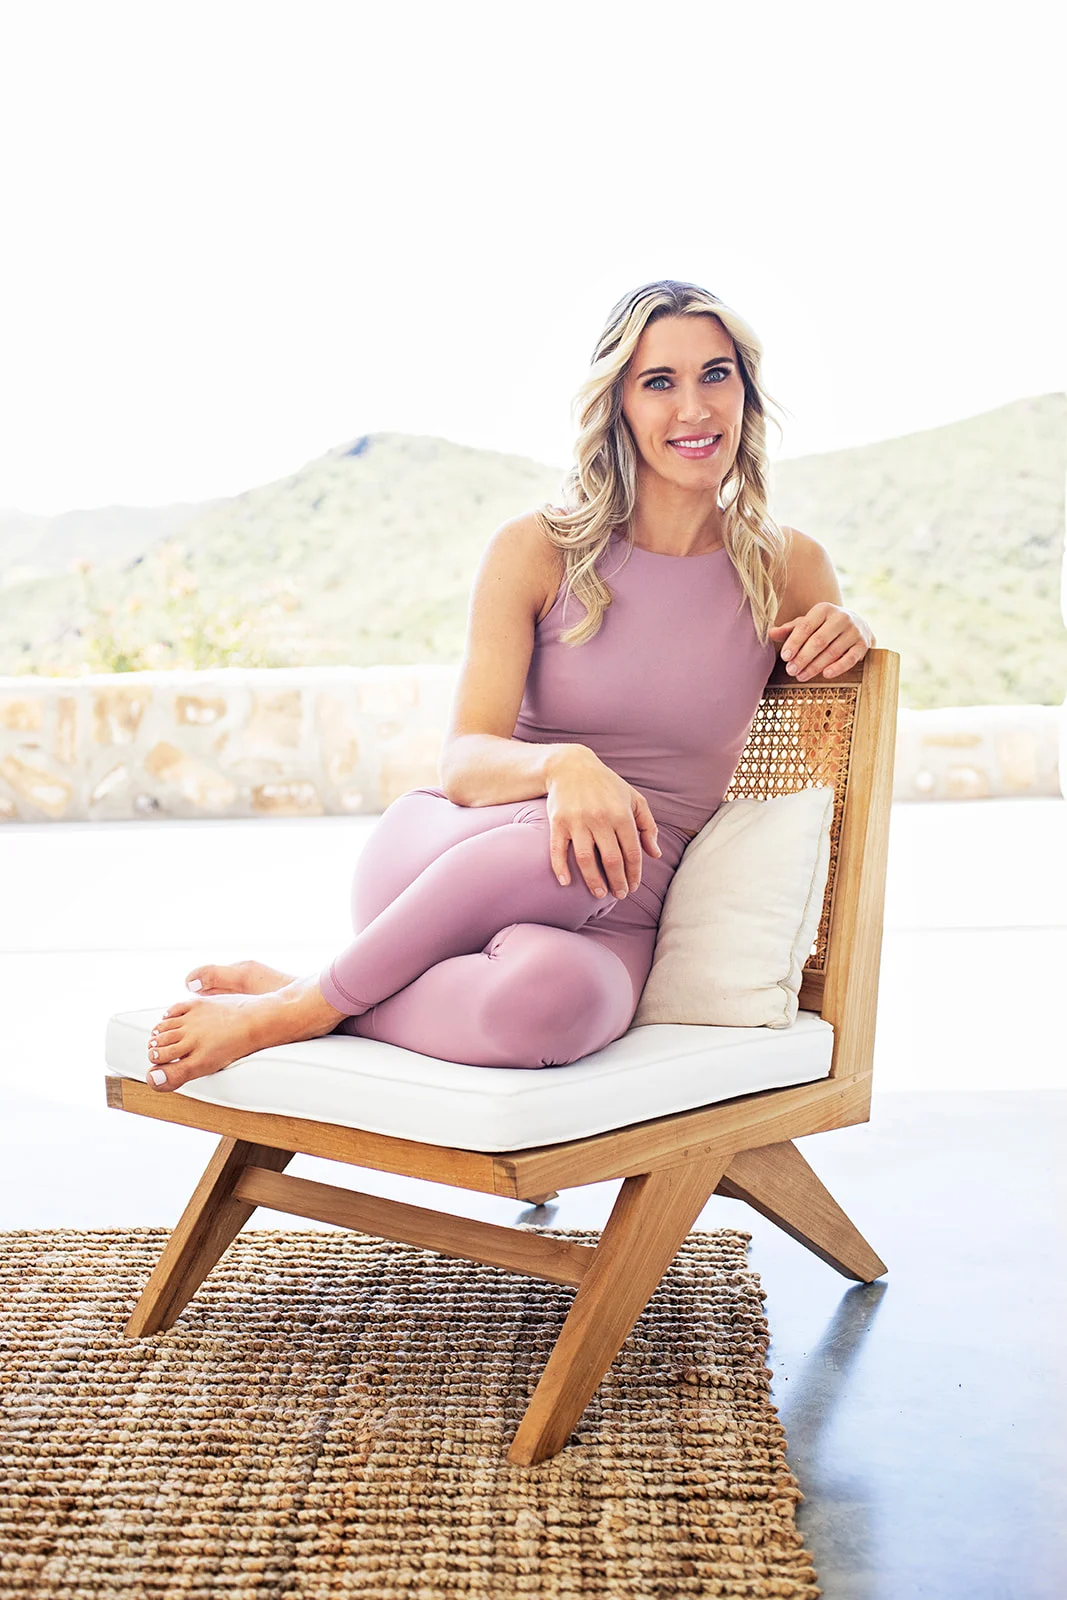 Courtney Virden is sitting in mauve leggings with pockets on the chair.